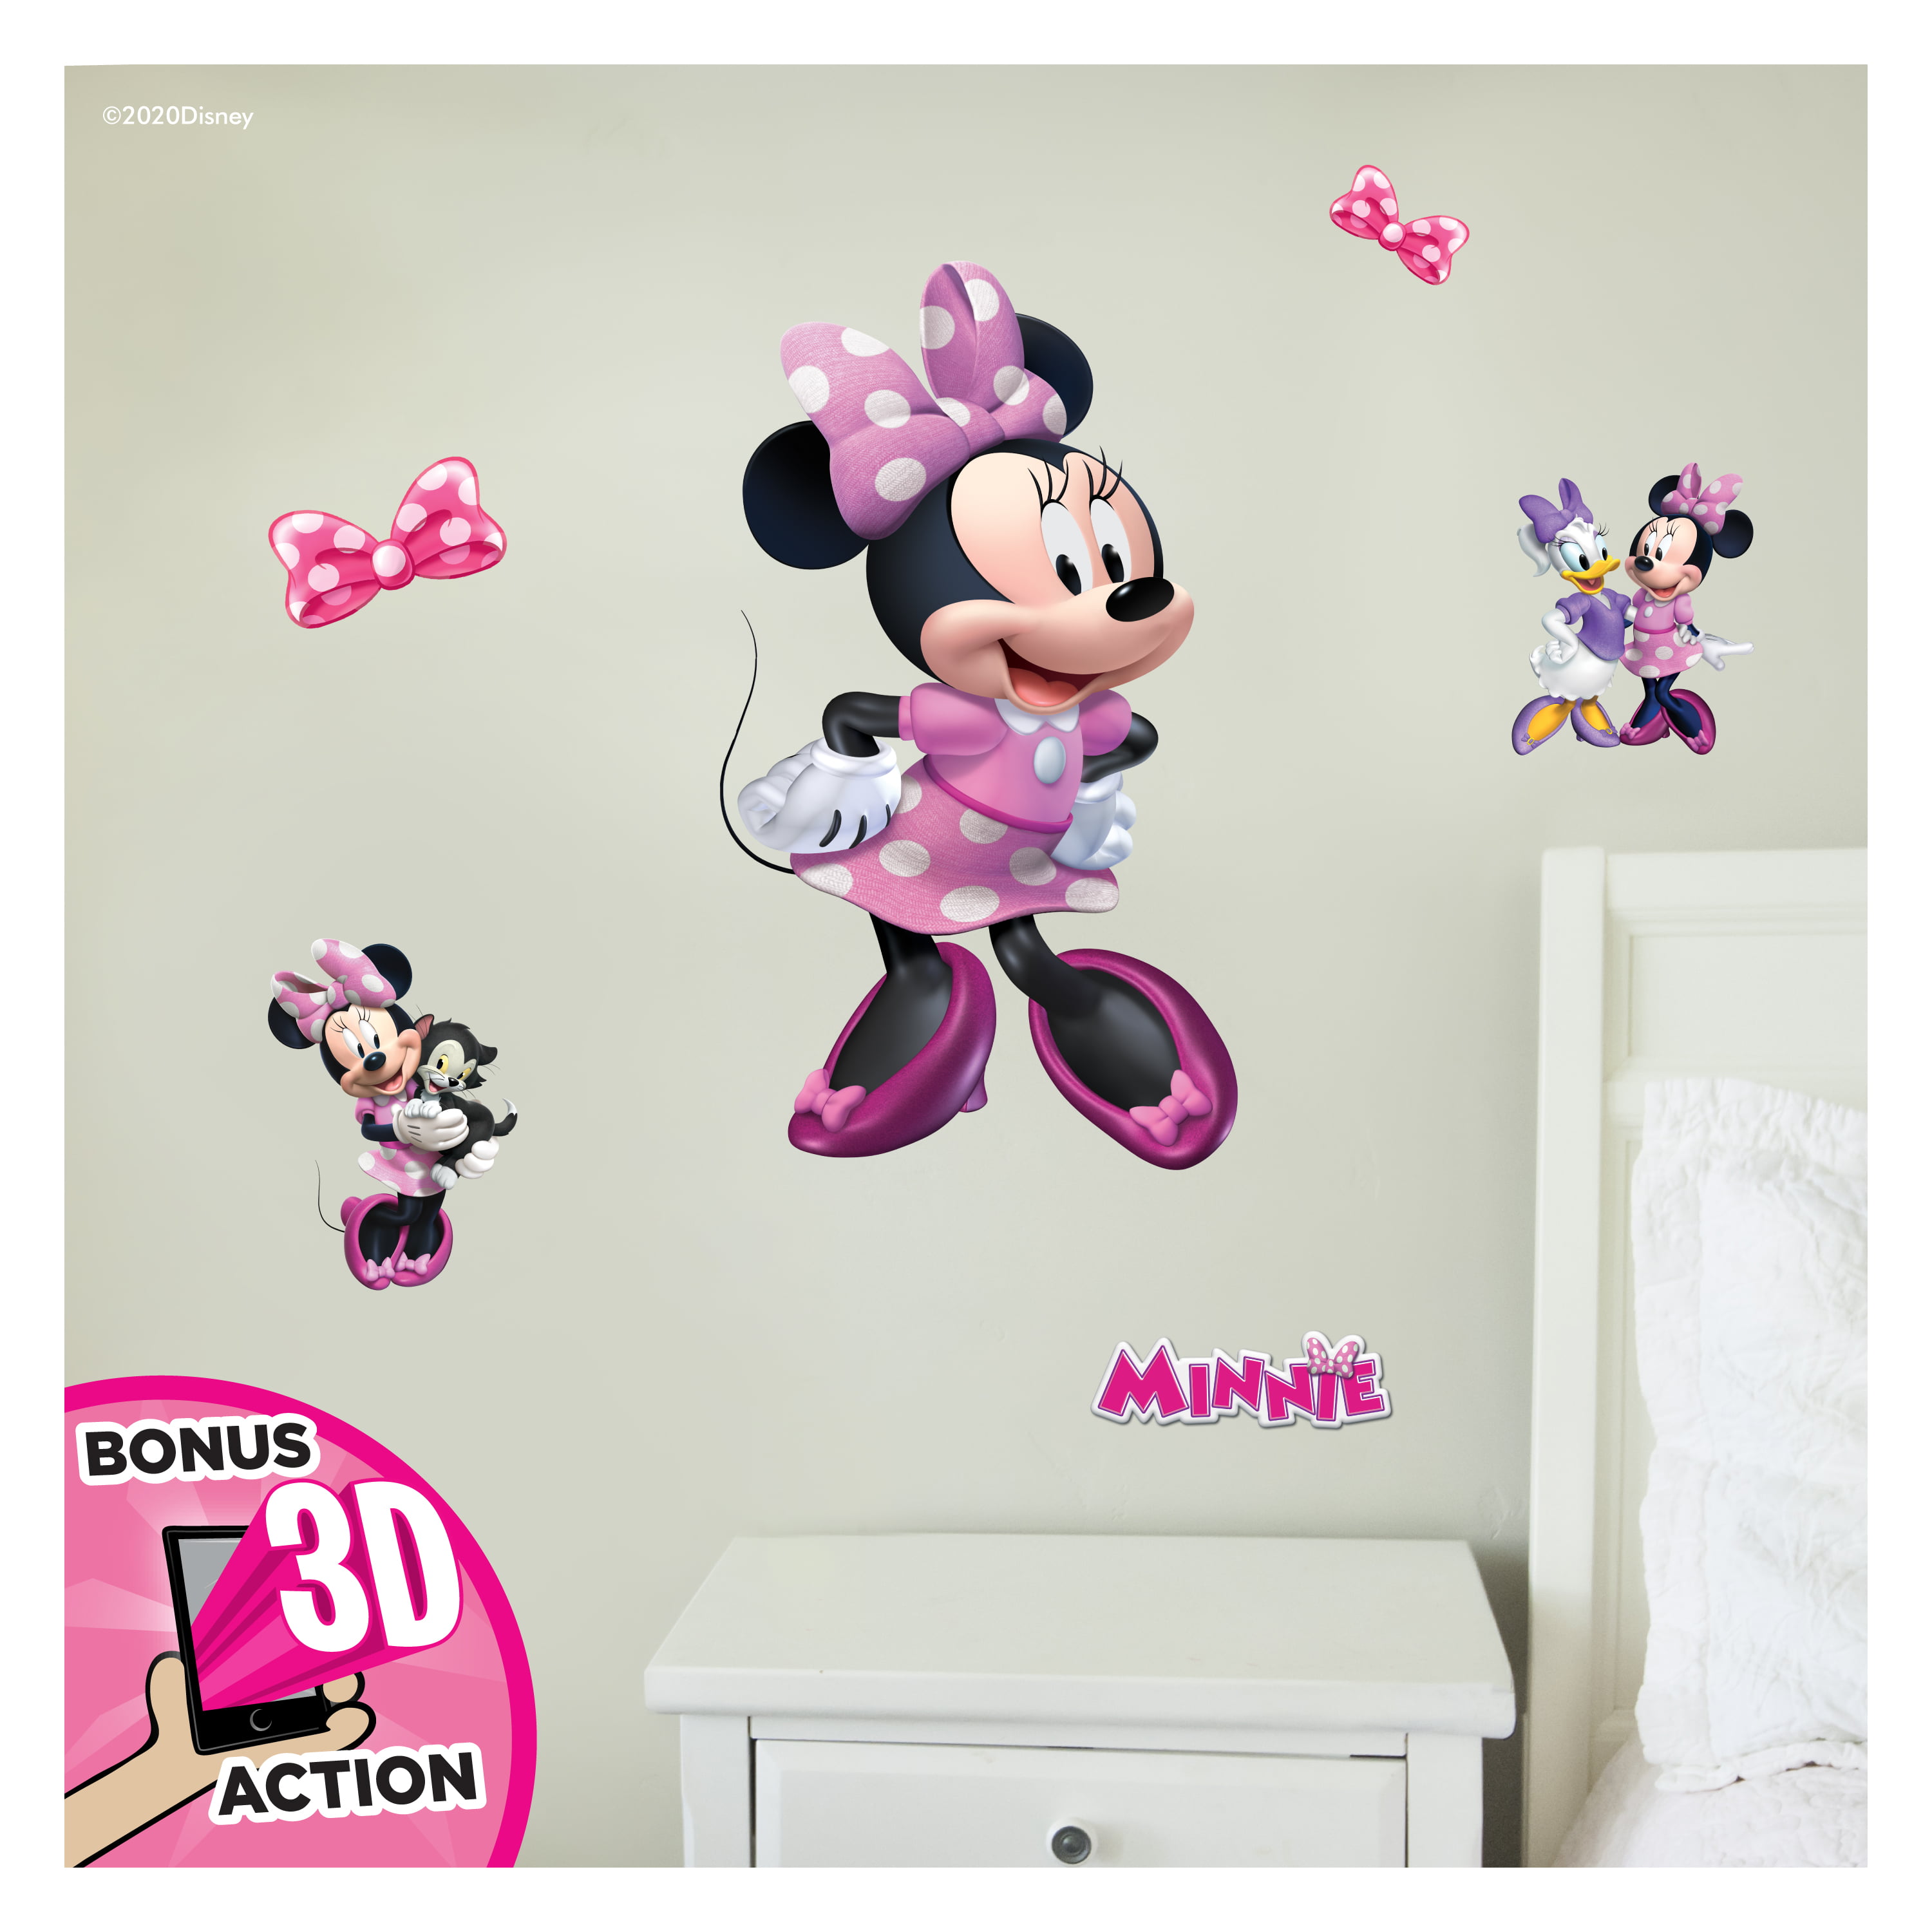 Cute Minnie Mouse Wall Stickers DIY Kids Girls Bedroom Decor Mural Vinyl Decal 